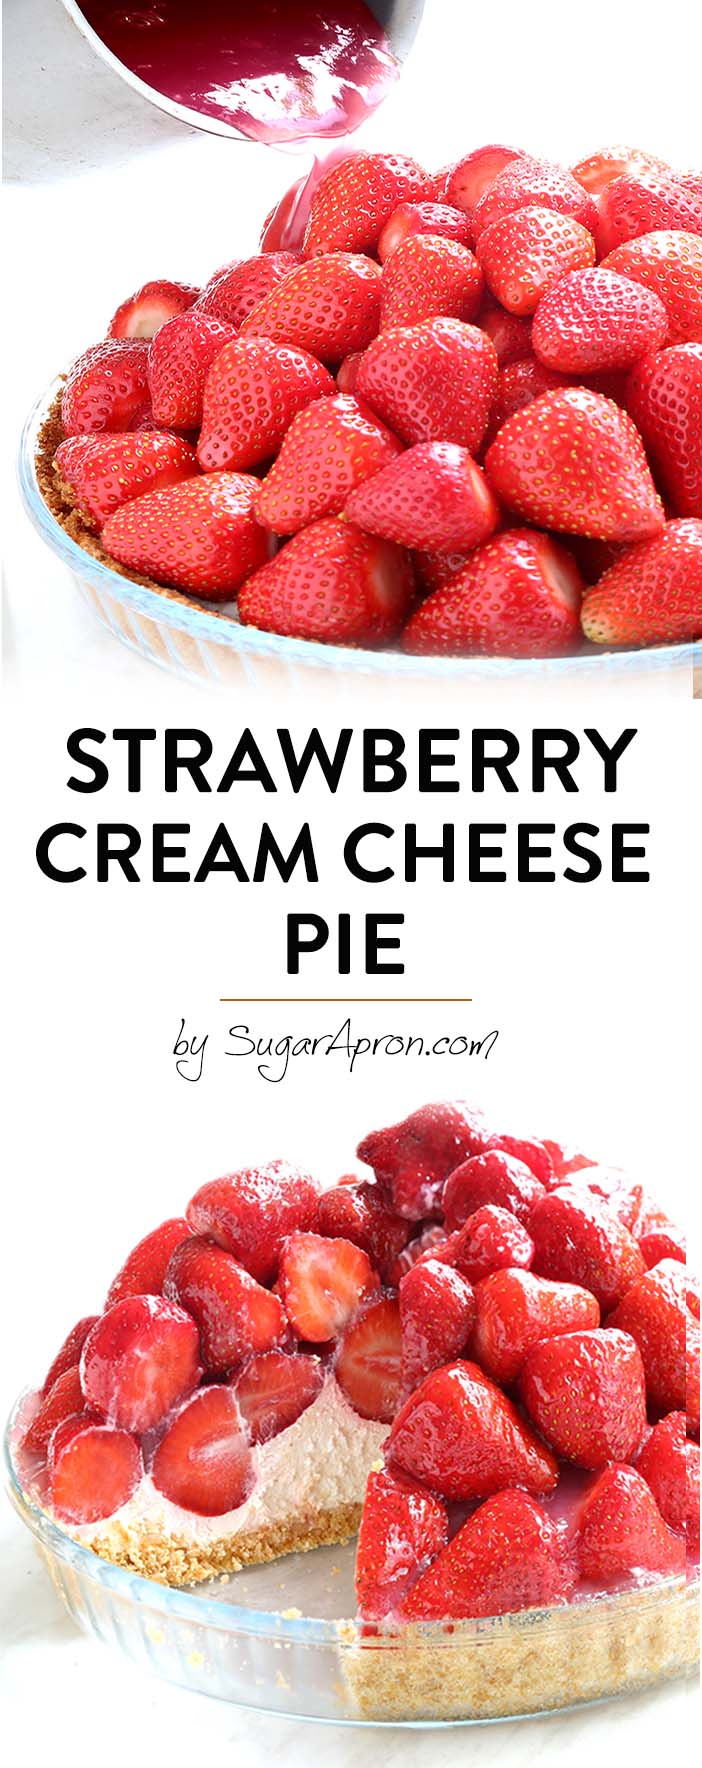 No Bake Strawberry Cream Cheese Pie is The BEST STRAWBERRY PIE you will ever have! Made with a graham cracker crust, filled with lemony cream cheese layer and topped with a mountain of juicy fresh strawberries.